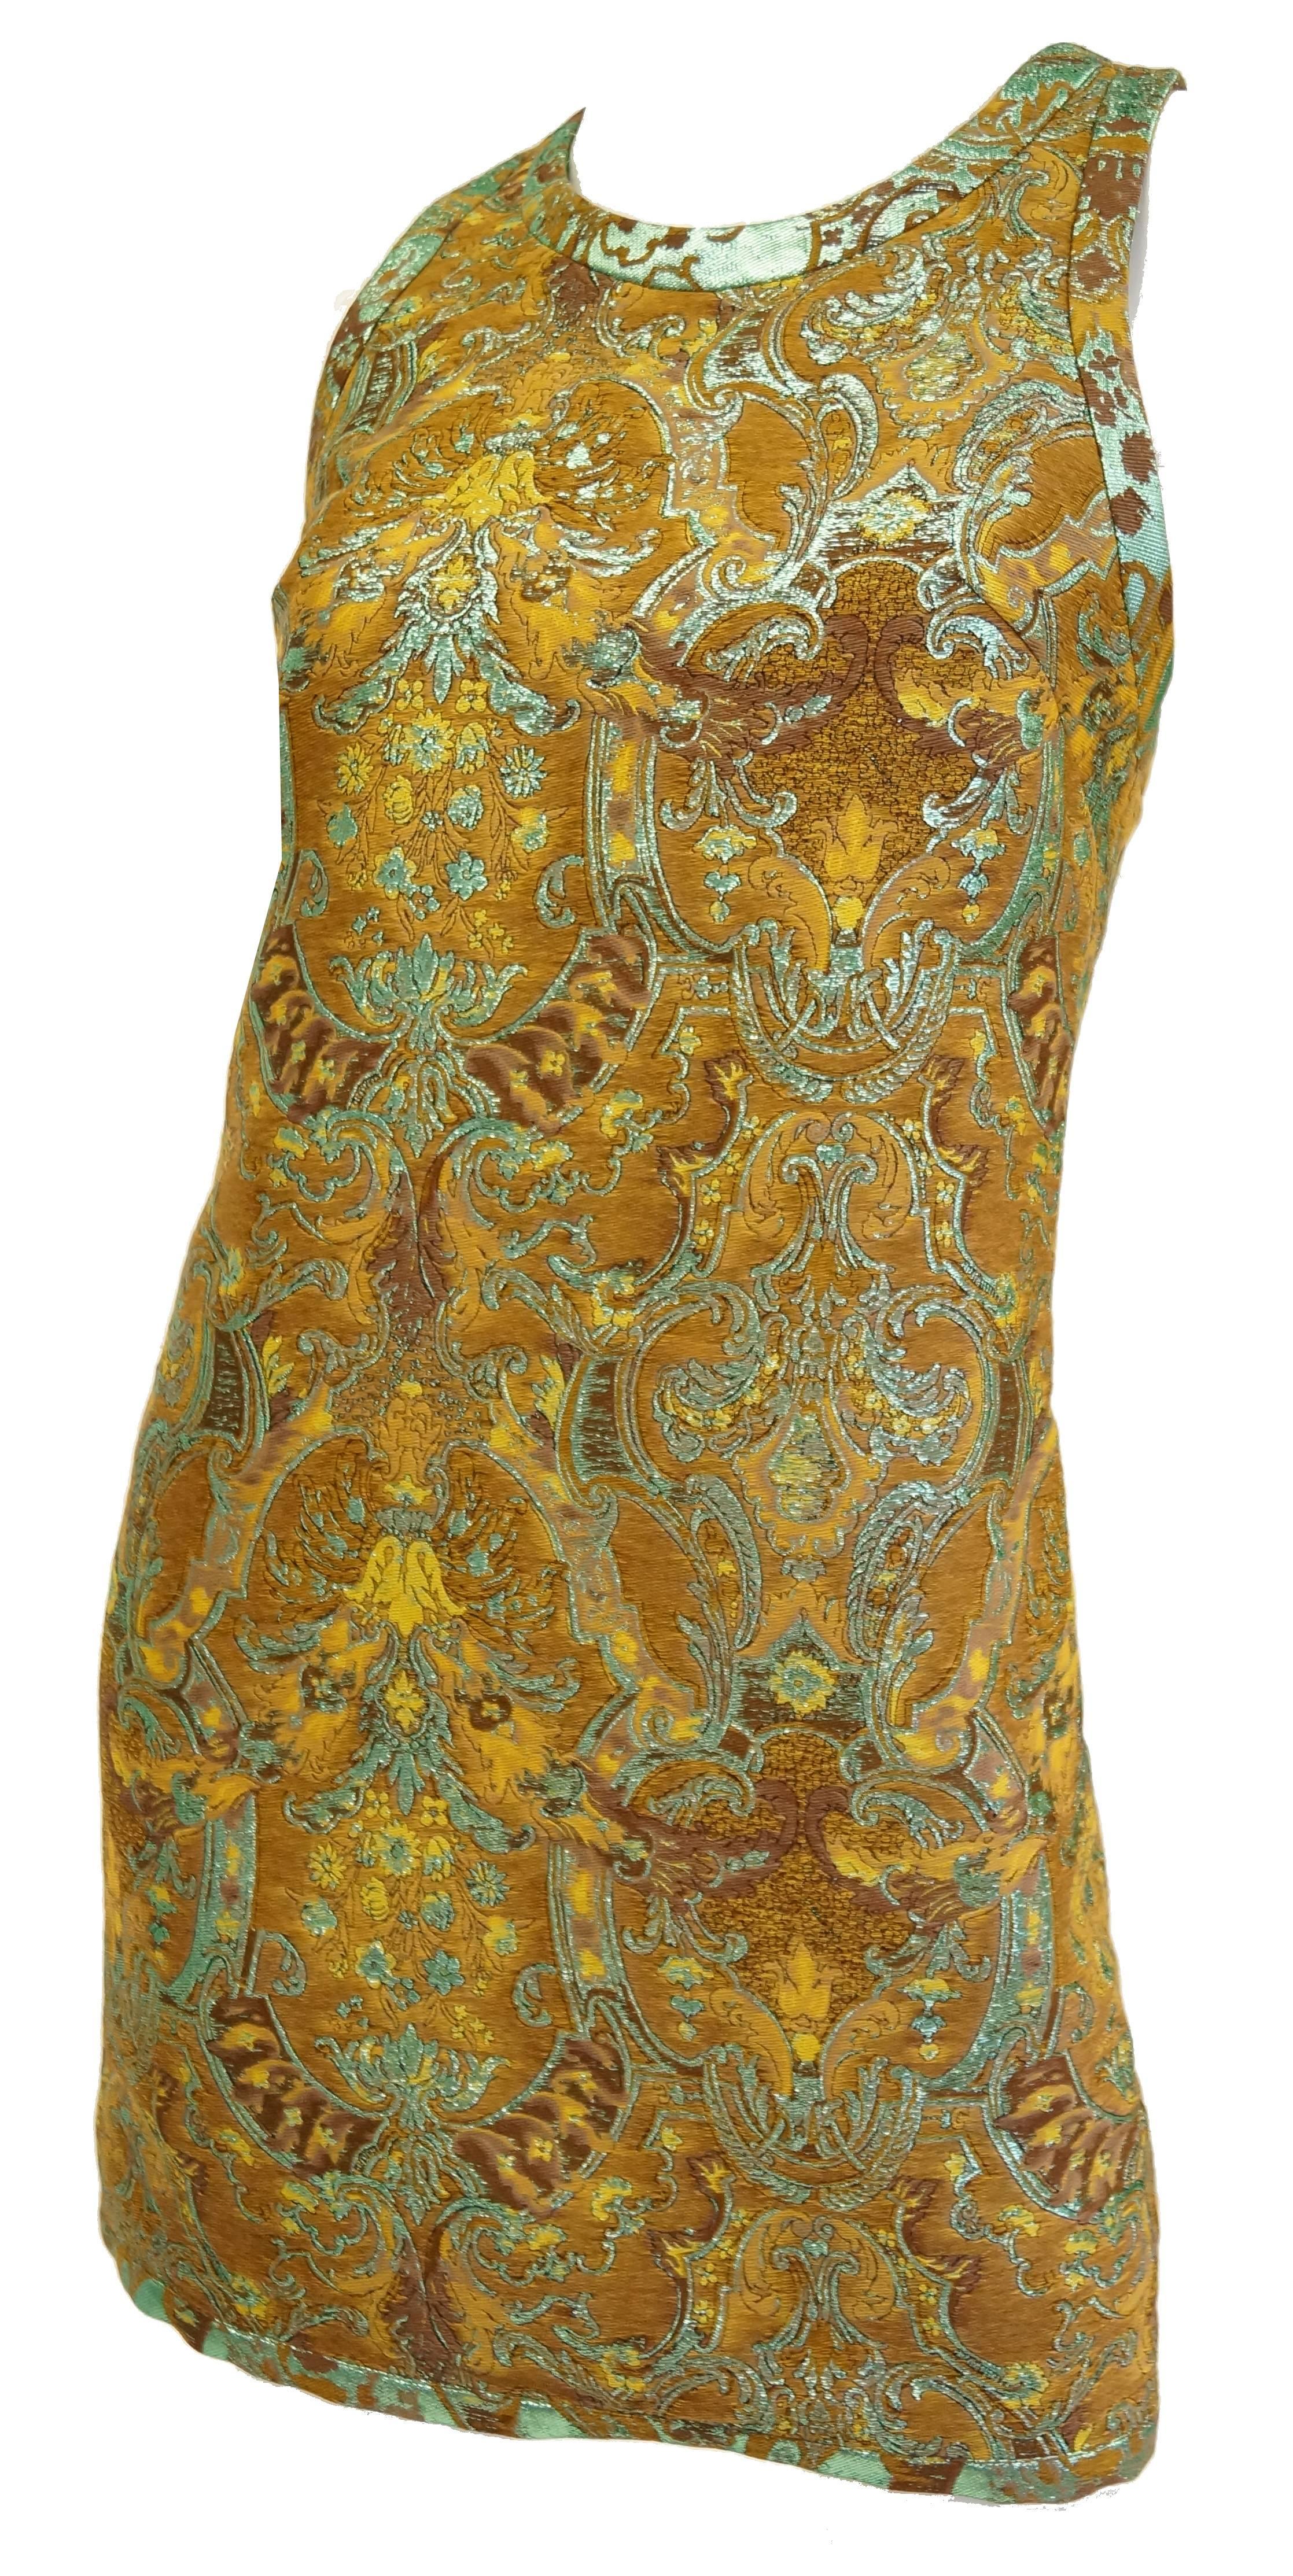 This jacquard dress by Barbara Bui is fantastic! The above the knee length shift dress is sleeveless with narrow straps and a high, round neckline, giving it a halter - like appearance. The traditional all - over jacquard print on the dress is